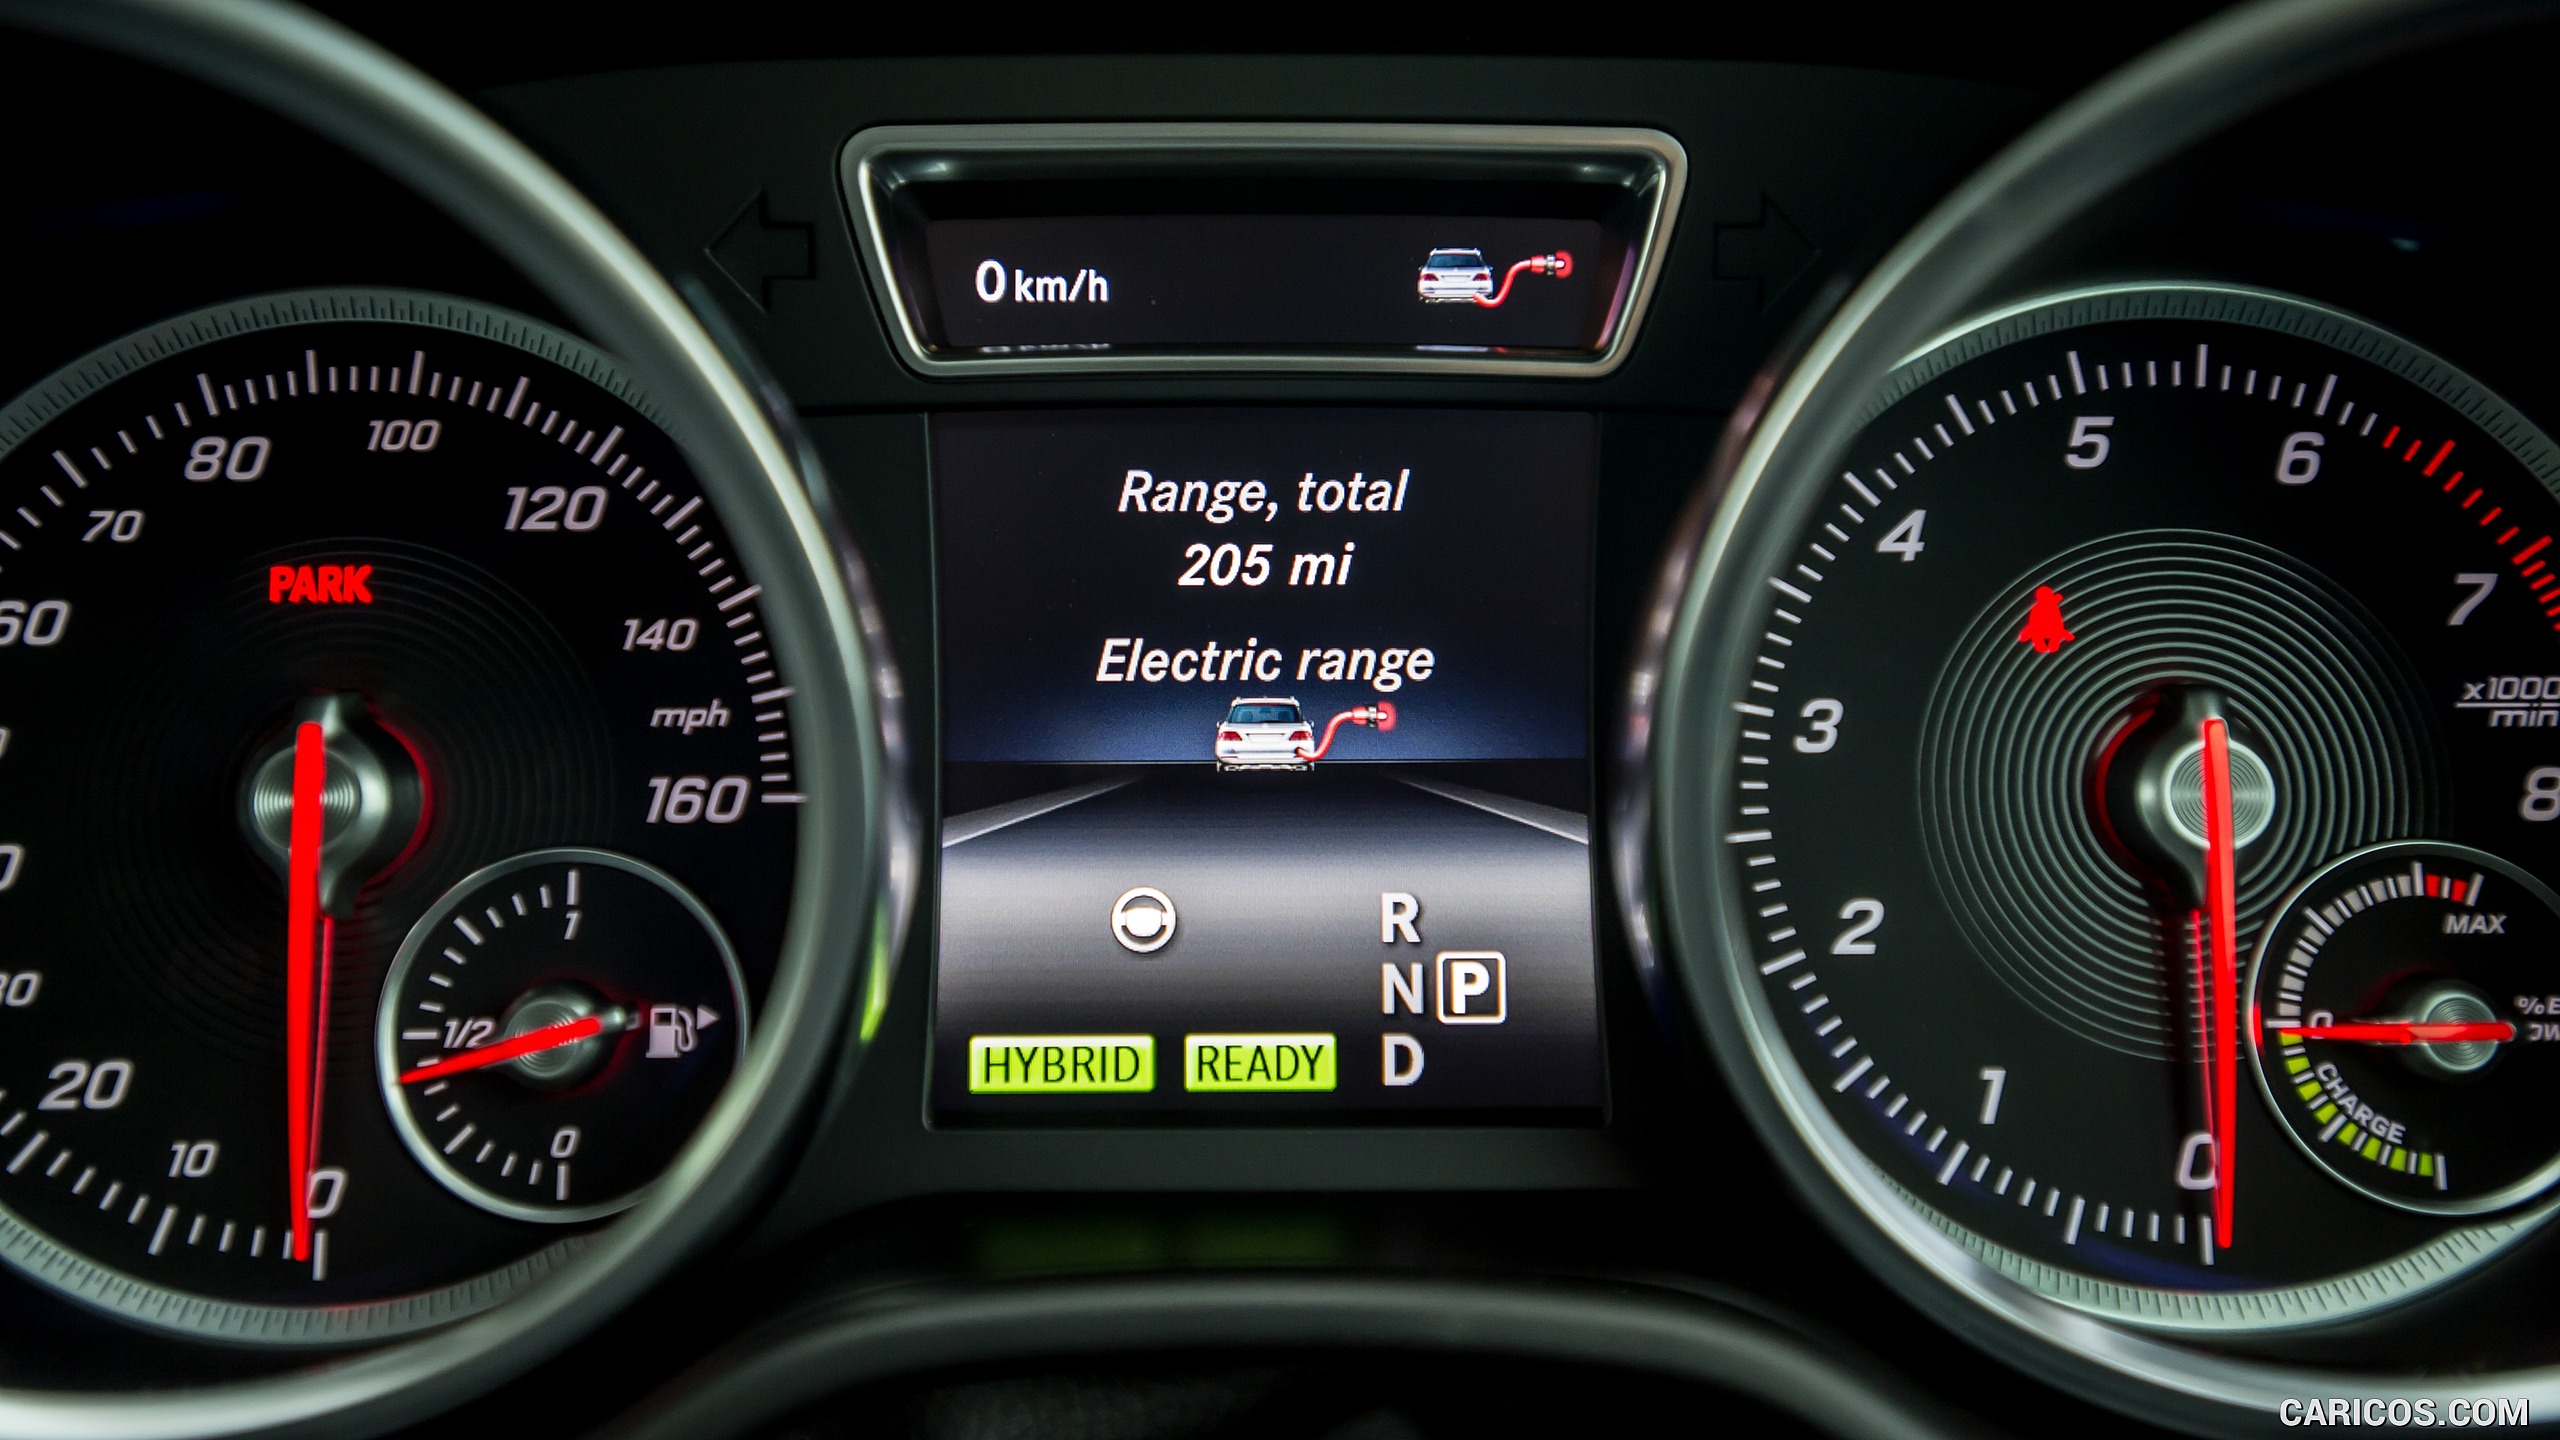 2016 Mercedes-Benz GLE-Class GLE 500e Plug-in-Hybrid AMG Line (UK-Spec) - Instrument Cluster, #135 of 141